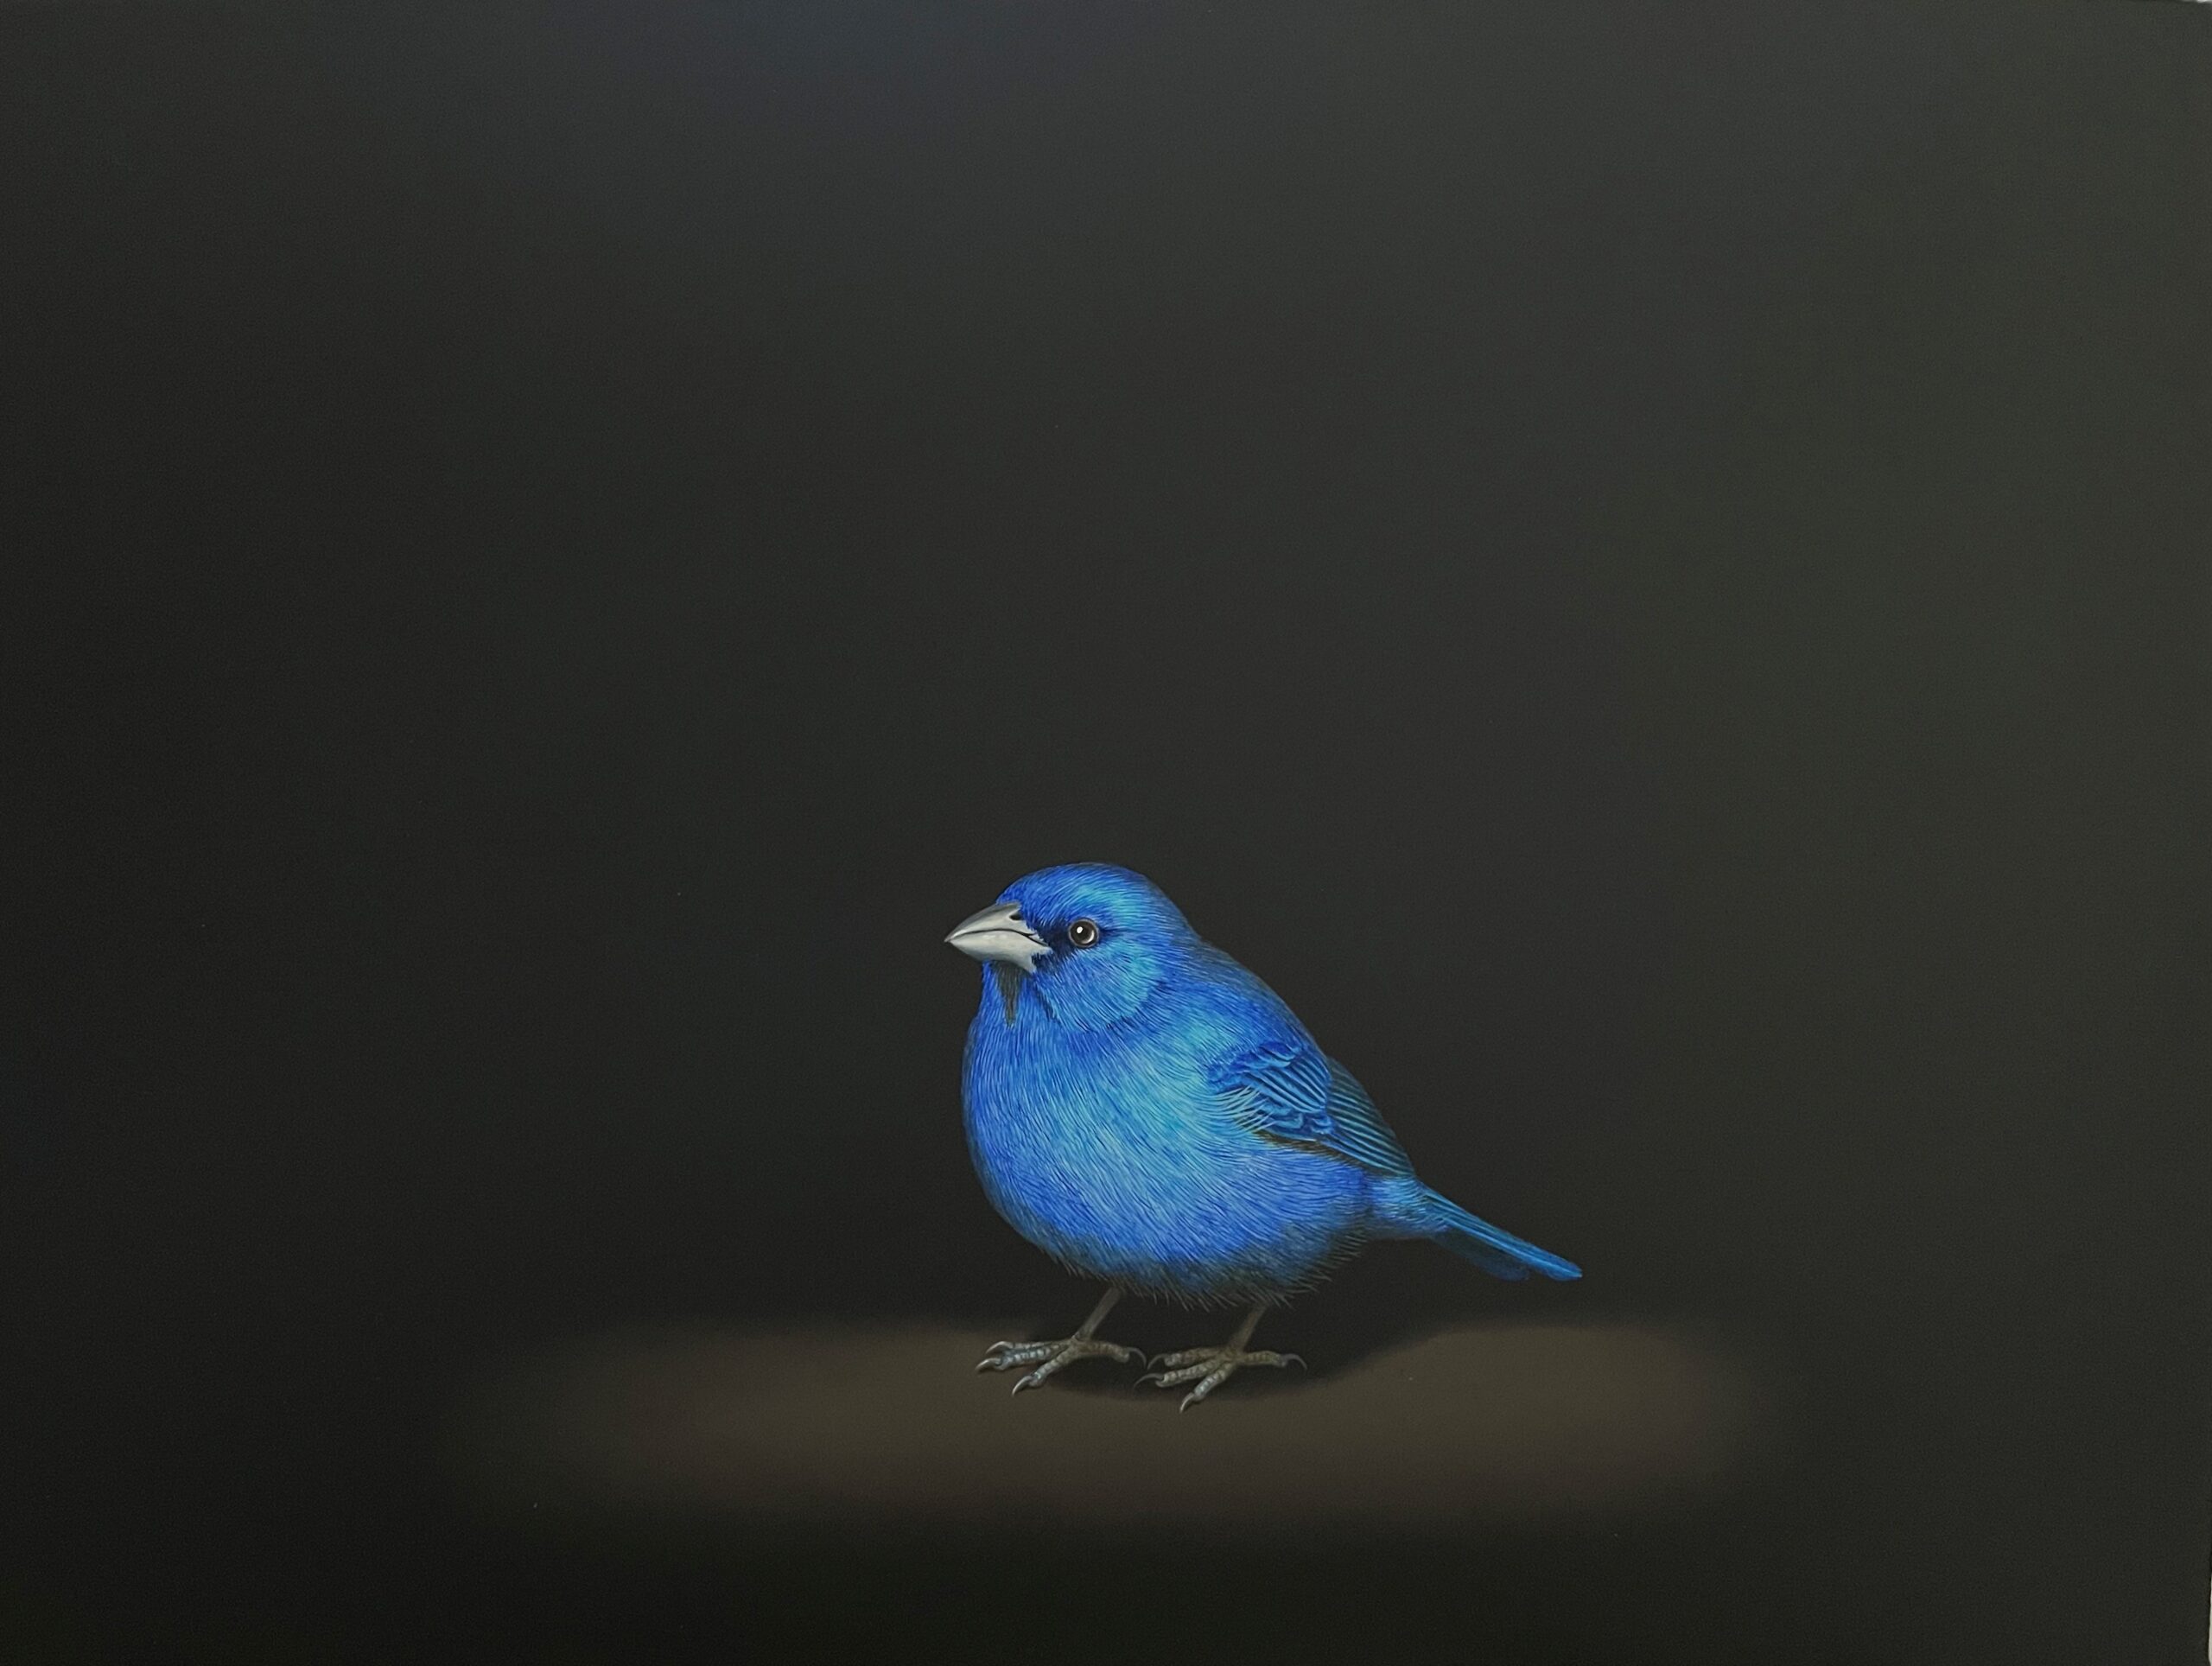 
							

									Isabelle Du Toit									Indigo Bunting 2023									oil on canvas<br />
9 x 12 x 1 1/2 inches									


							